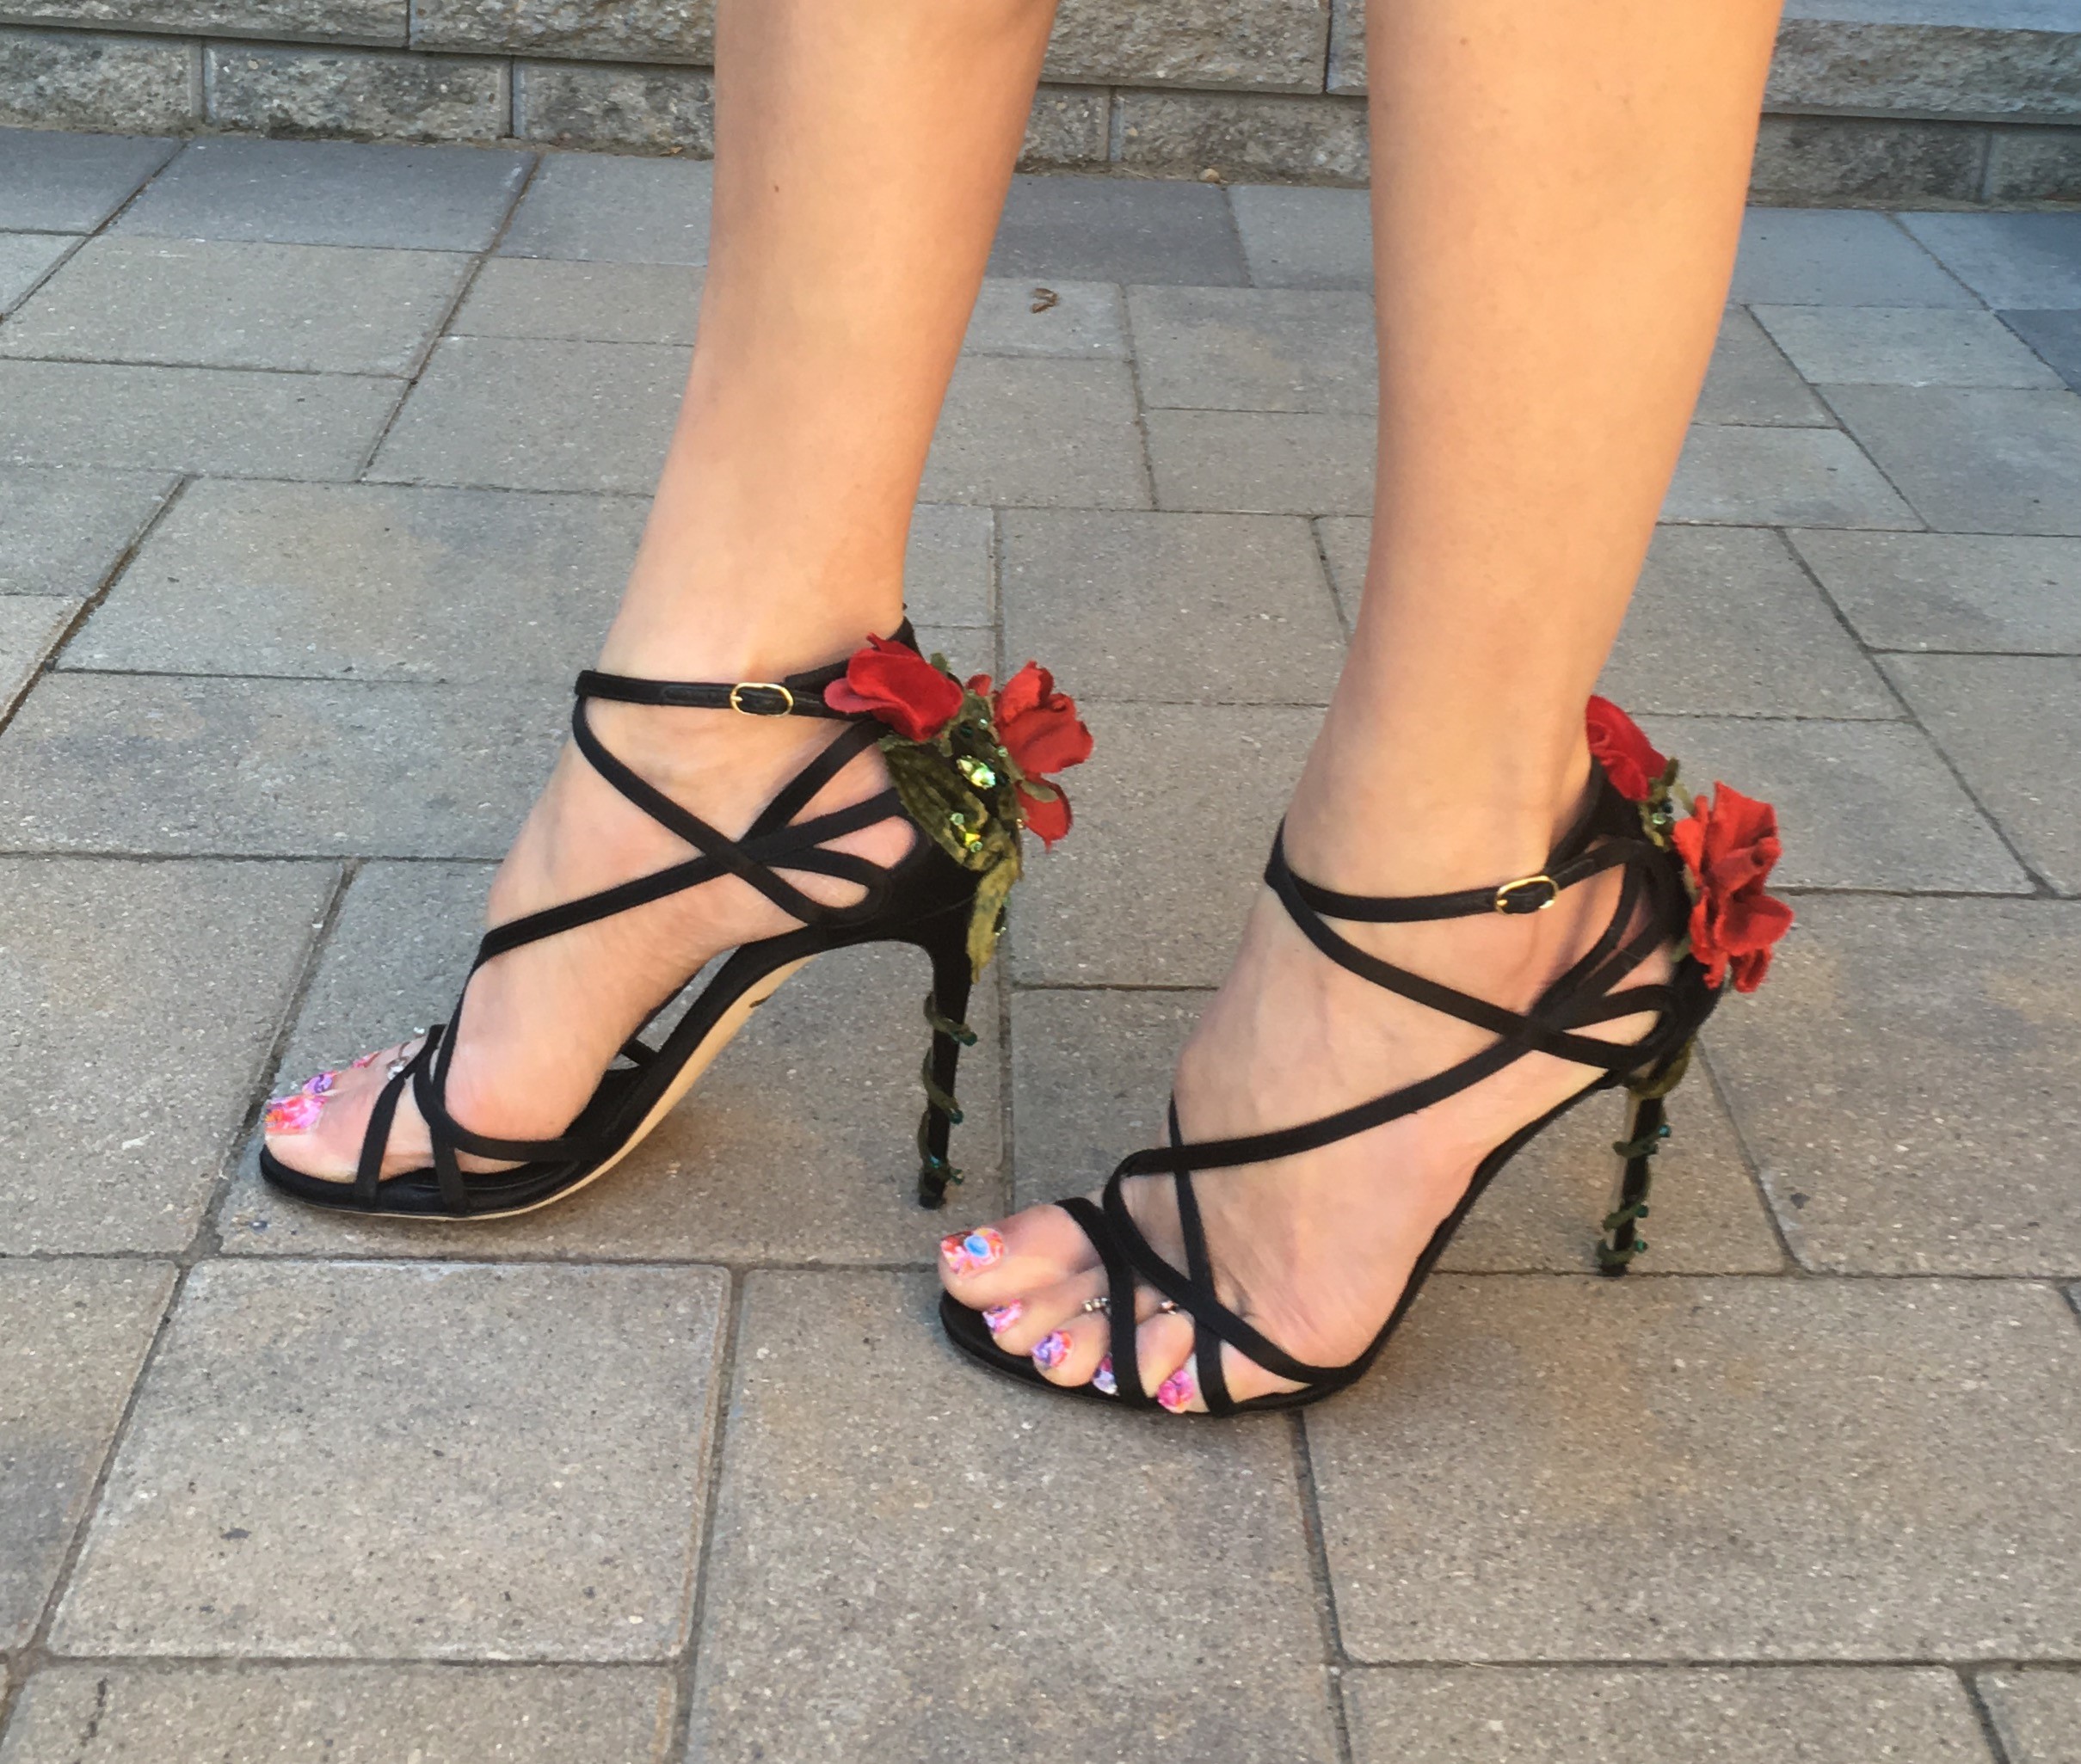 dolce and gabbana rose heels